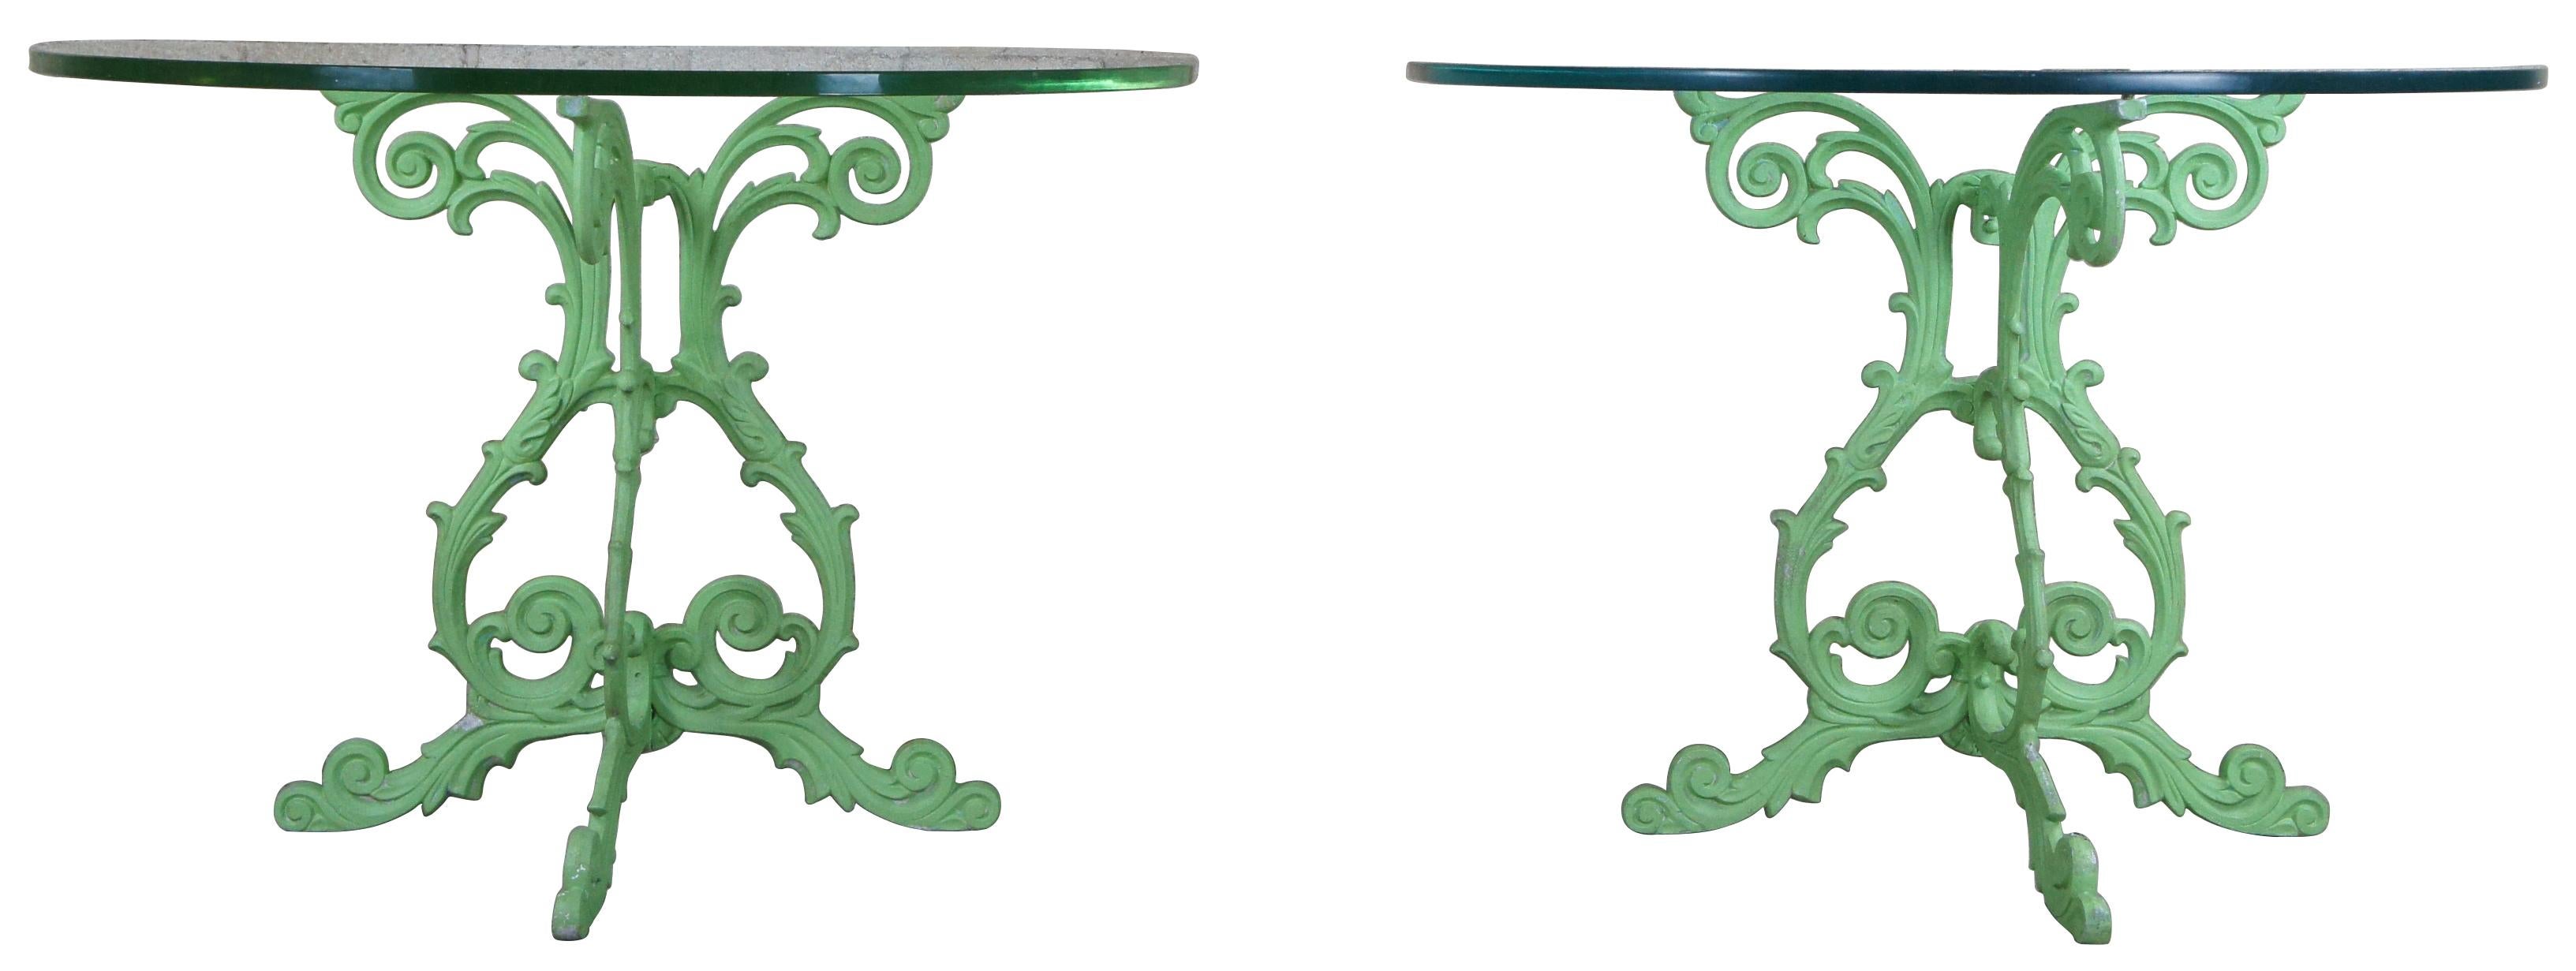 2 mid century cast iron and glass demilune console tables. Featuring scrolled iron bases and heavy glass tops. Bases finished in a lime green. 

Measure: Base - 26.5